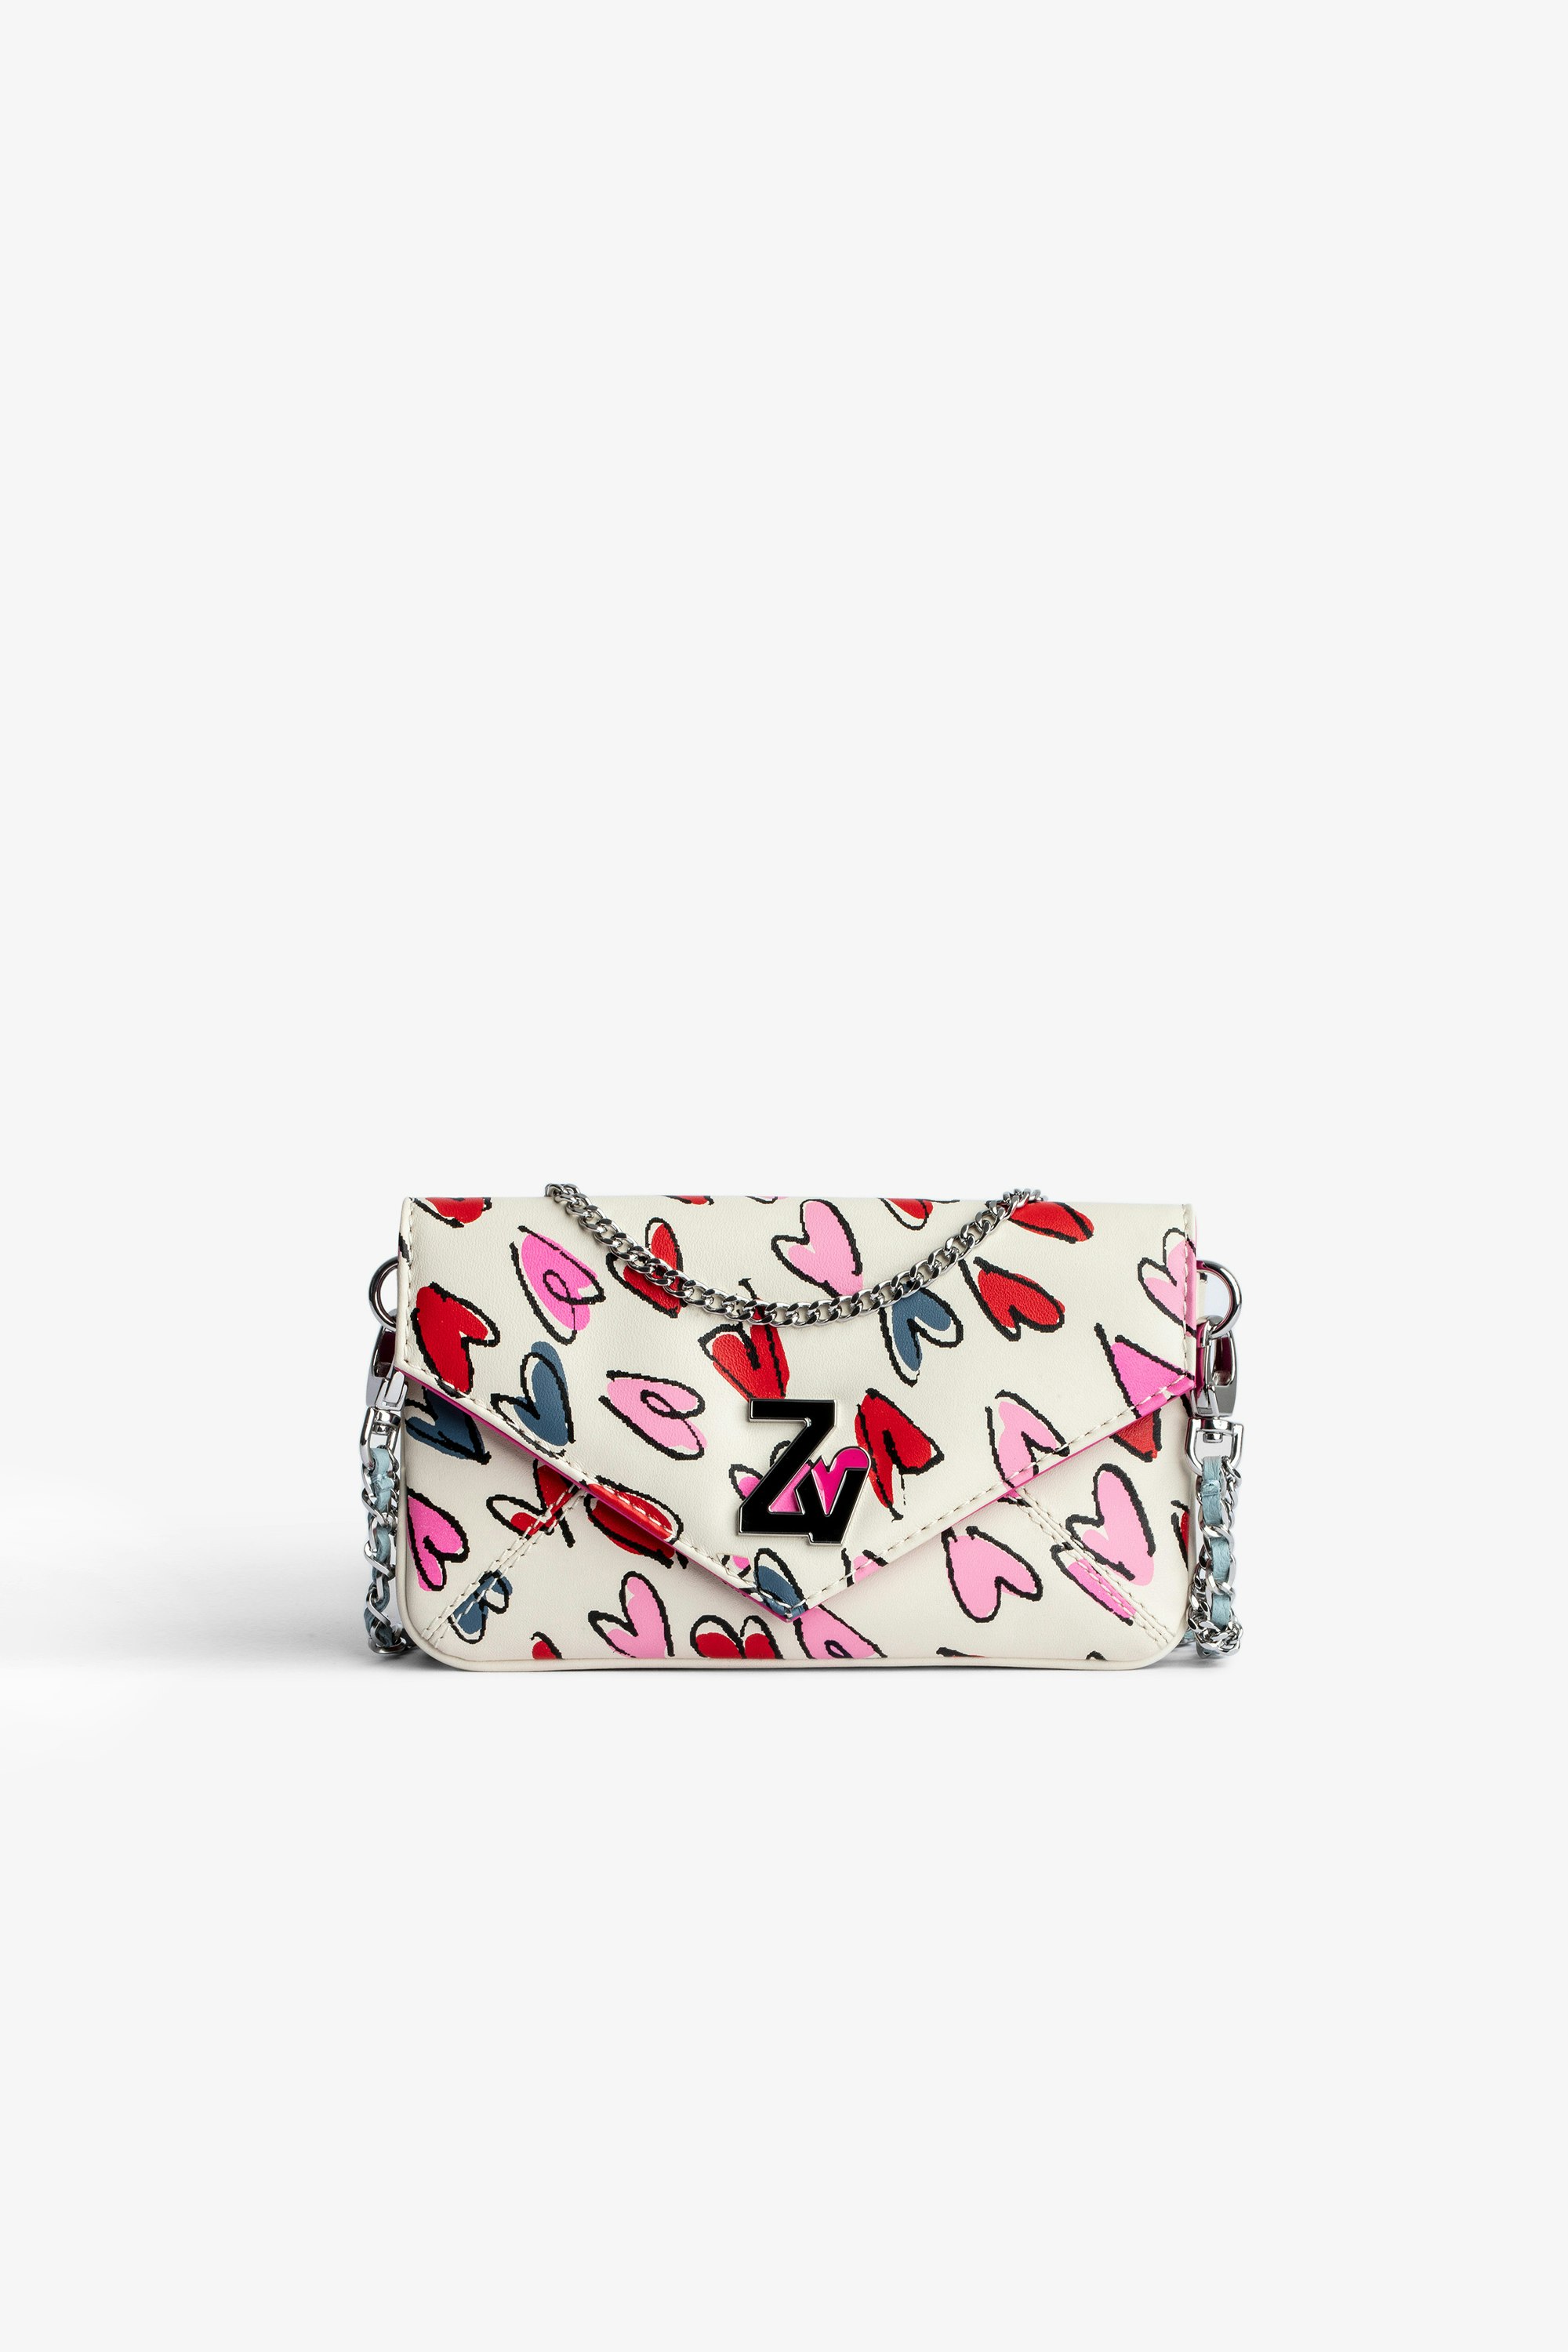 Rockeur Nano クラッチバッグ Women’s clutch in white leather featuring red and pink hearts